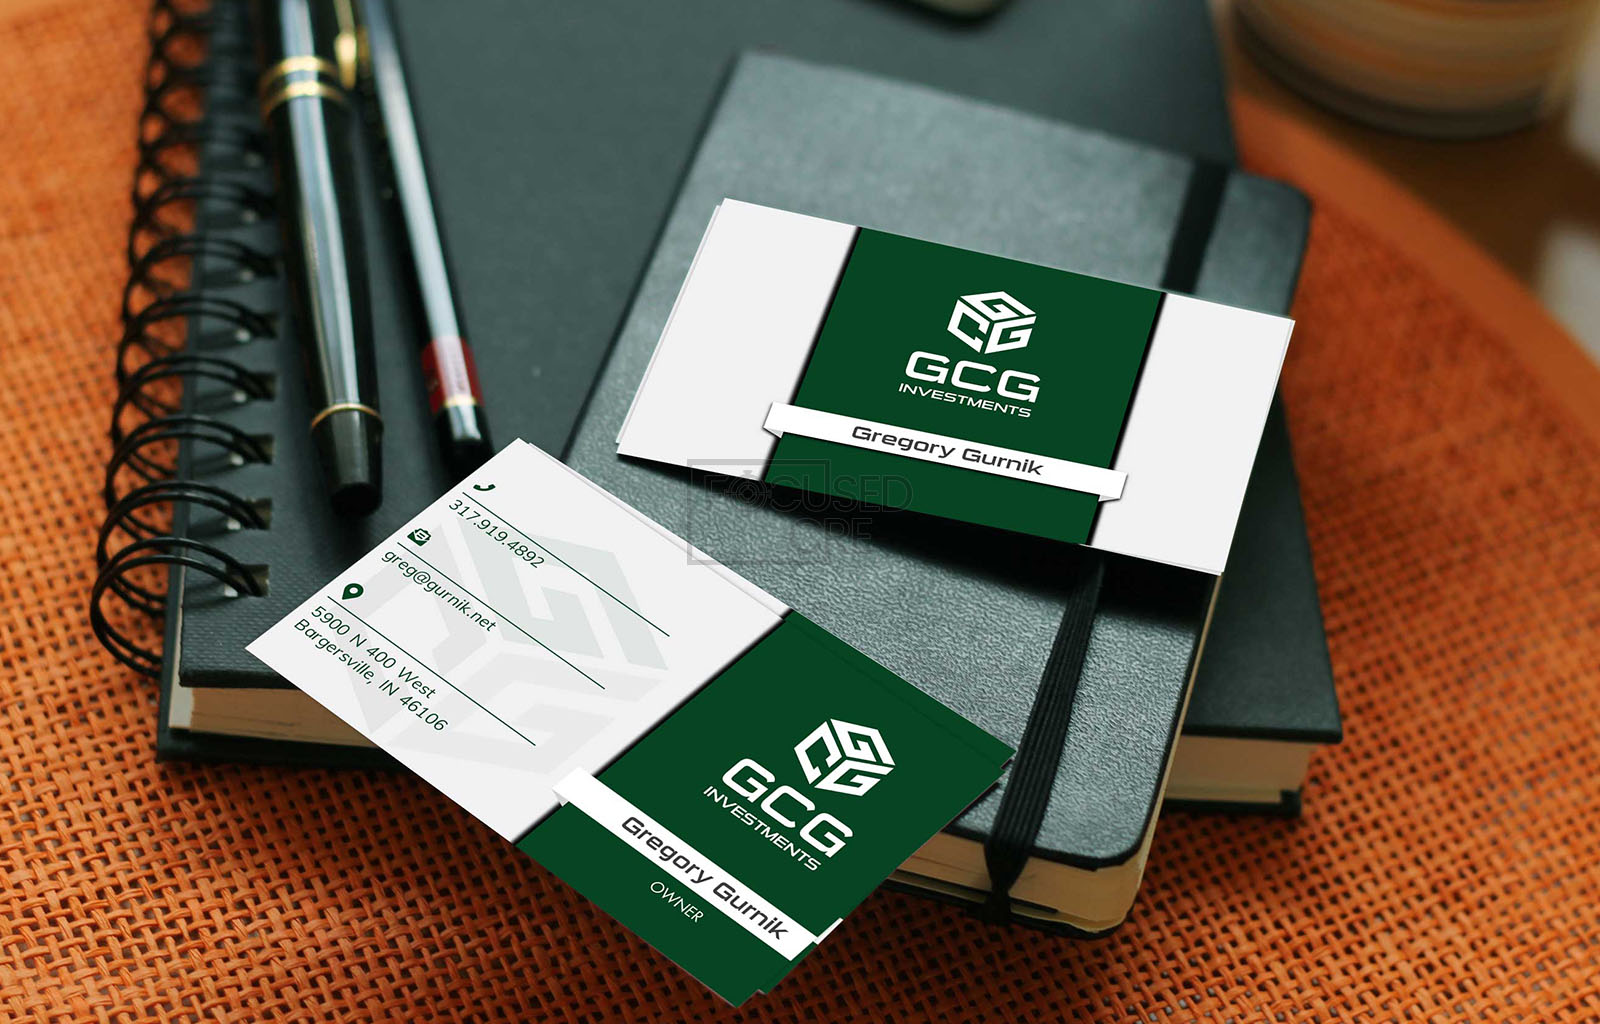 Merrill Property Group business card design by FocusedCRE